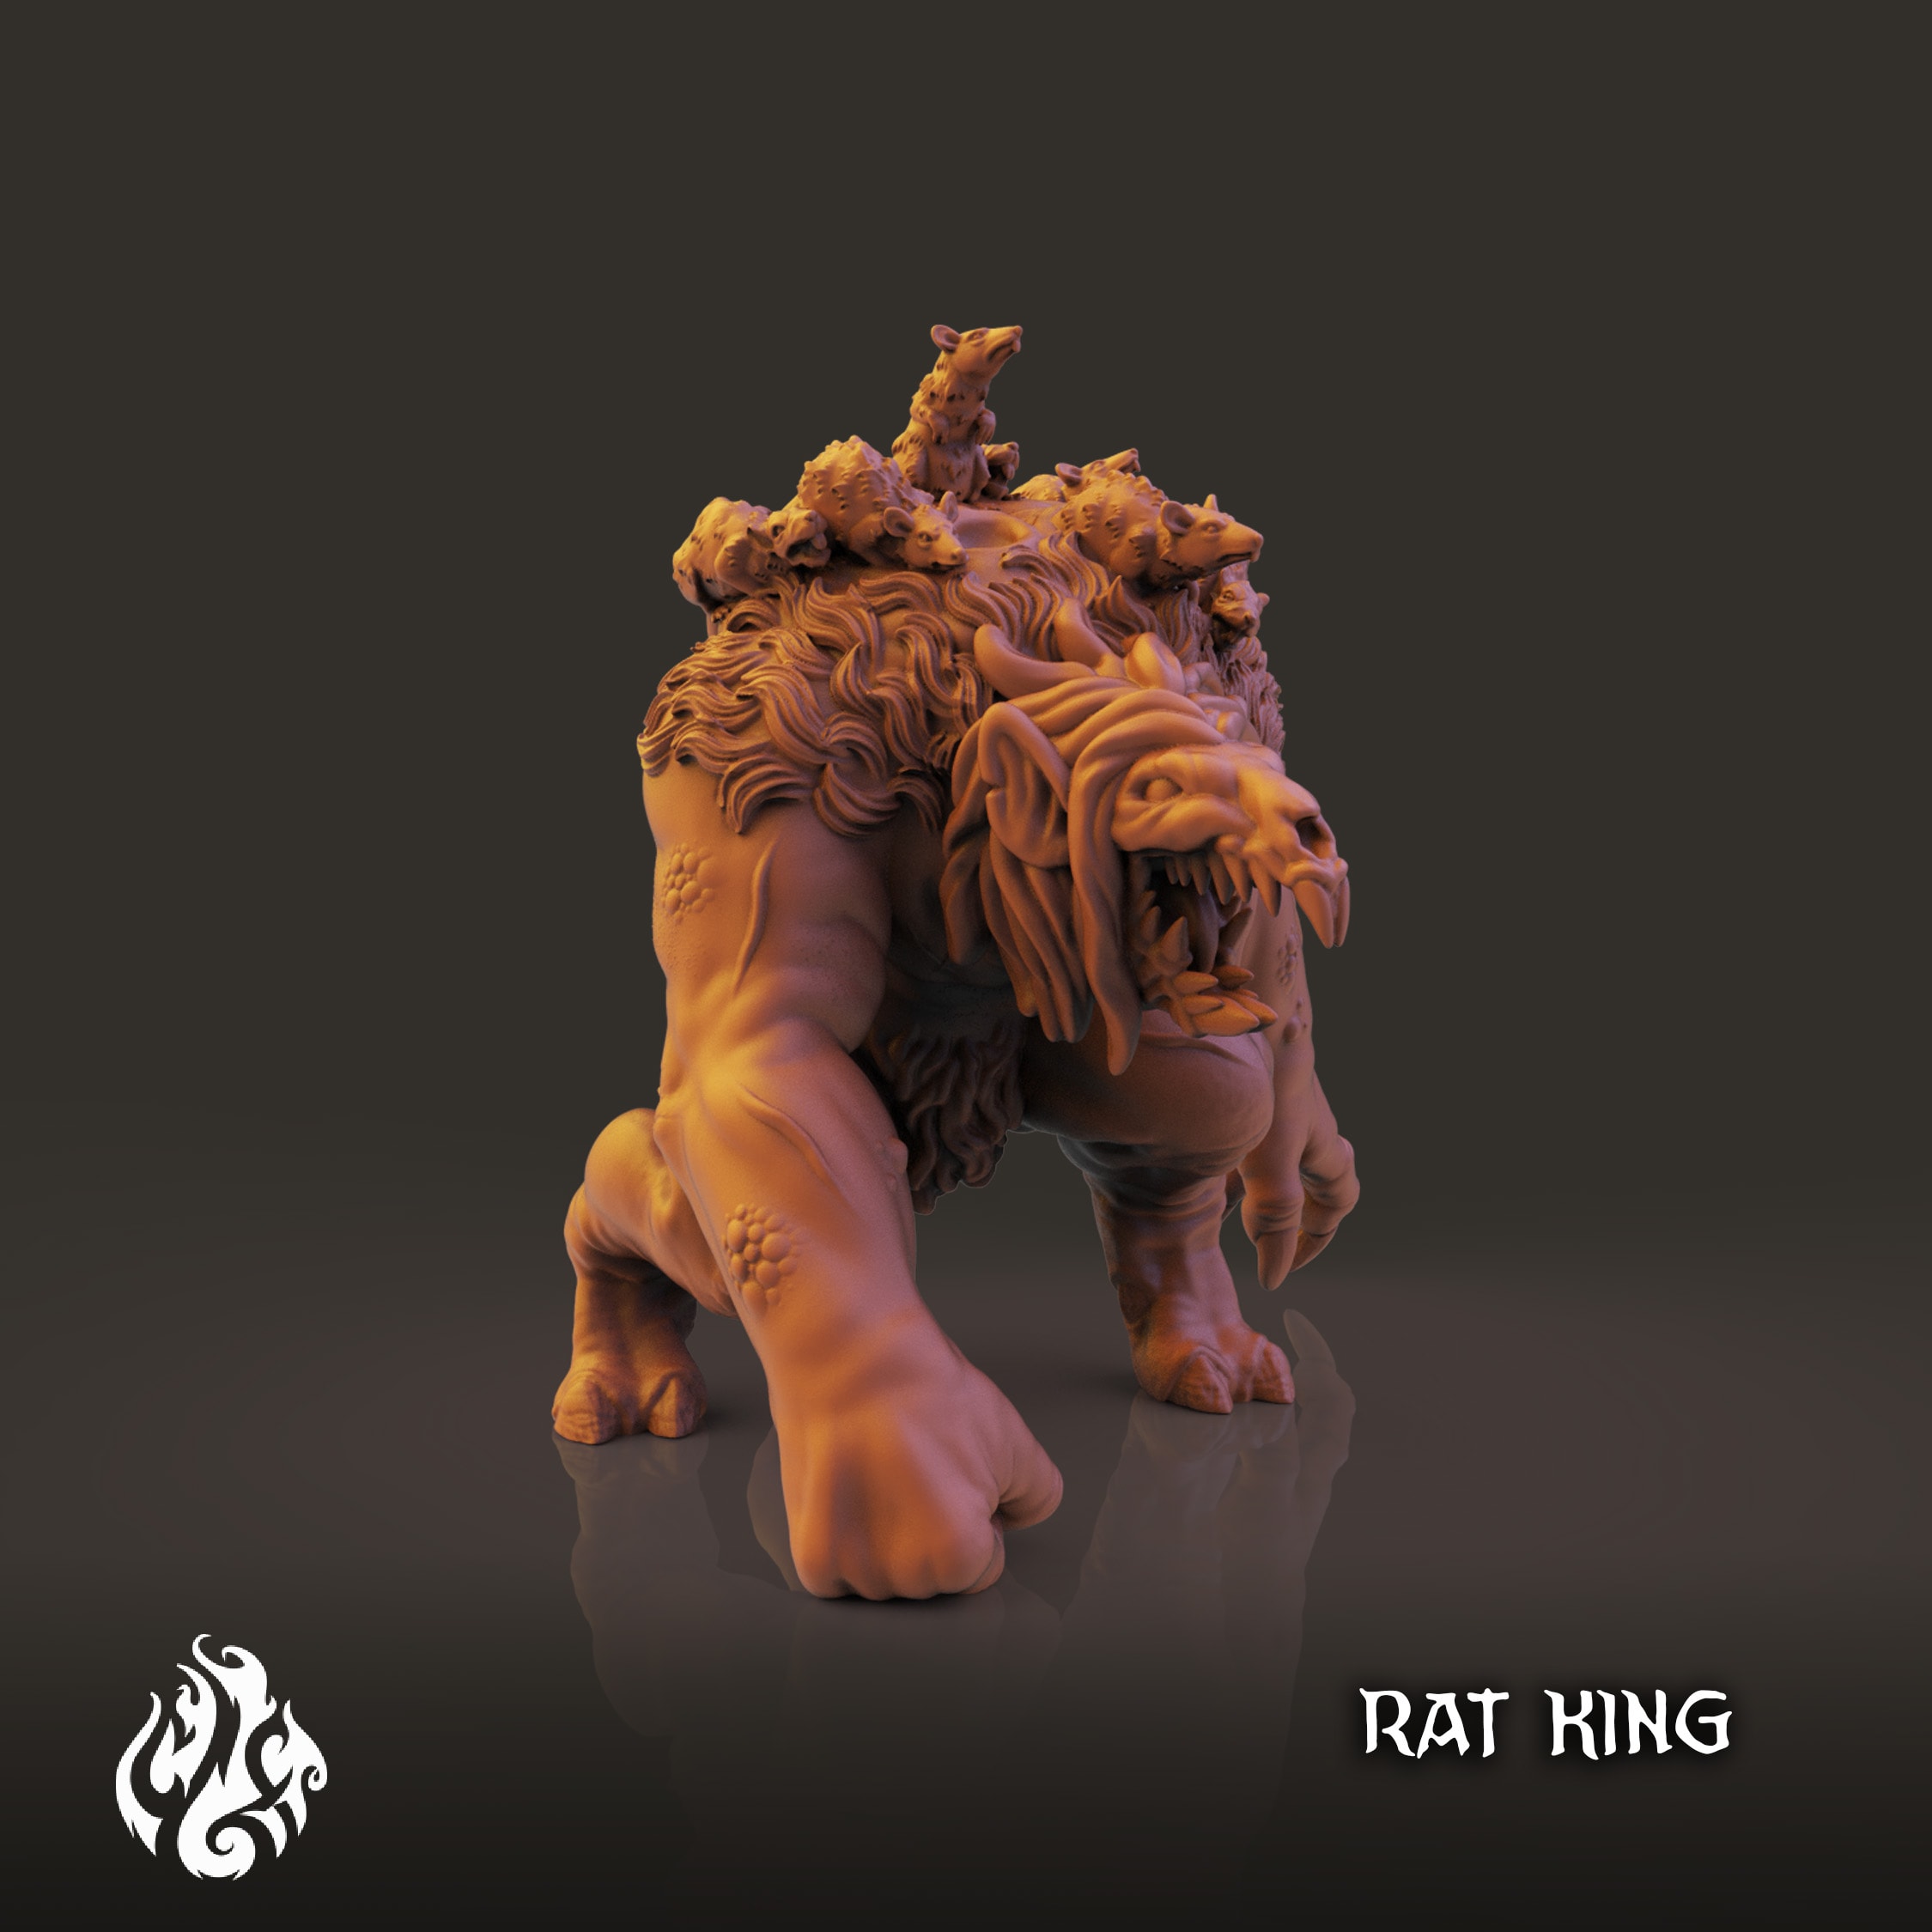 mad rat king with an emerald eye yiealding a golden  - prompthunt